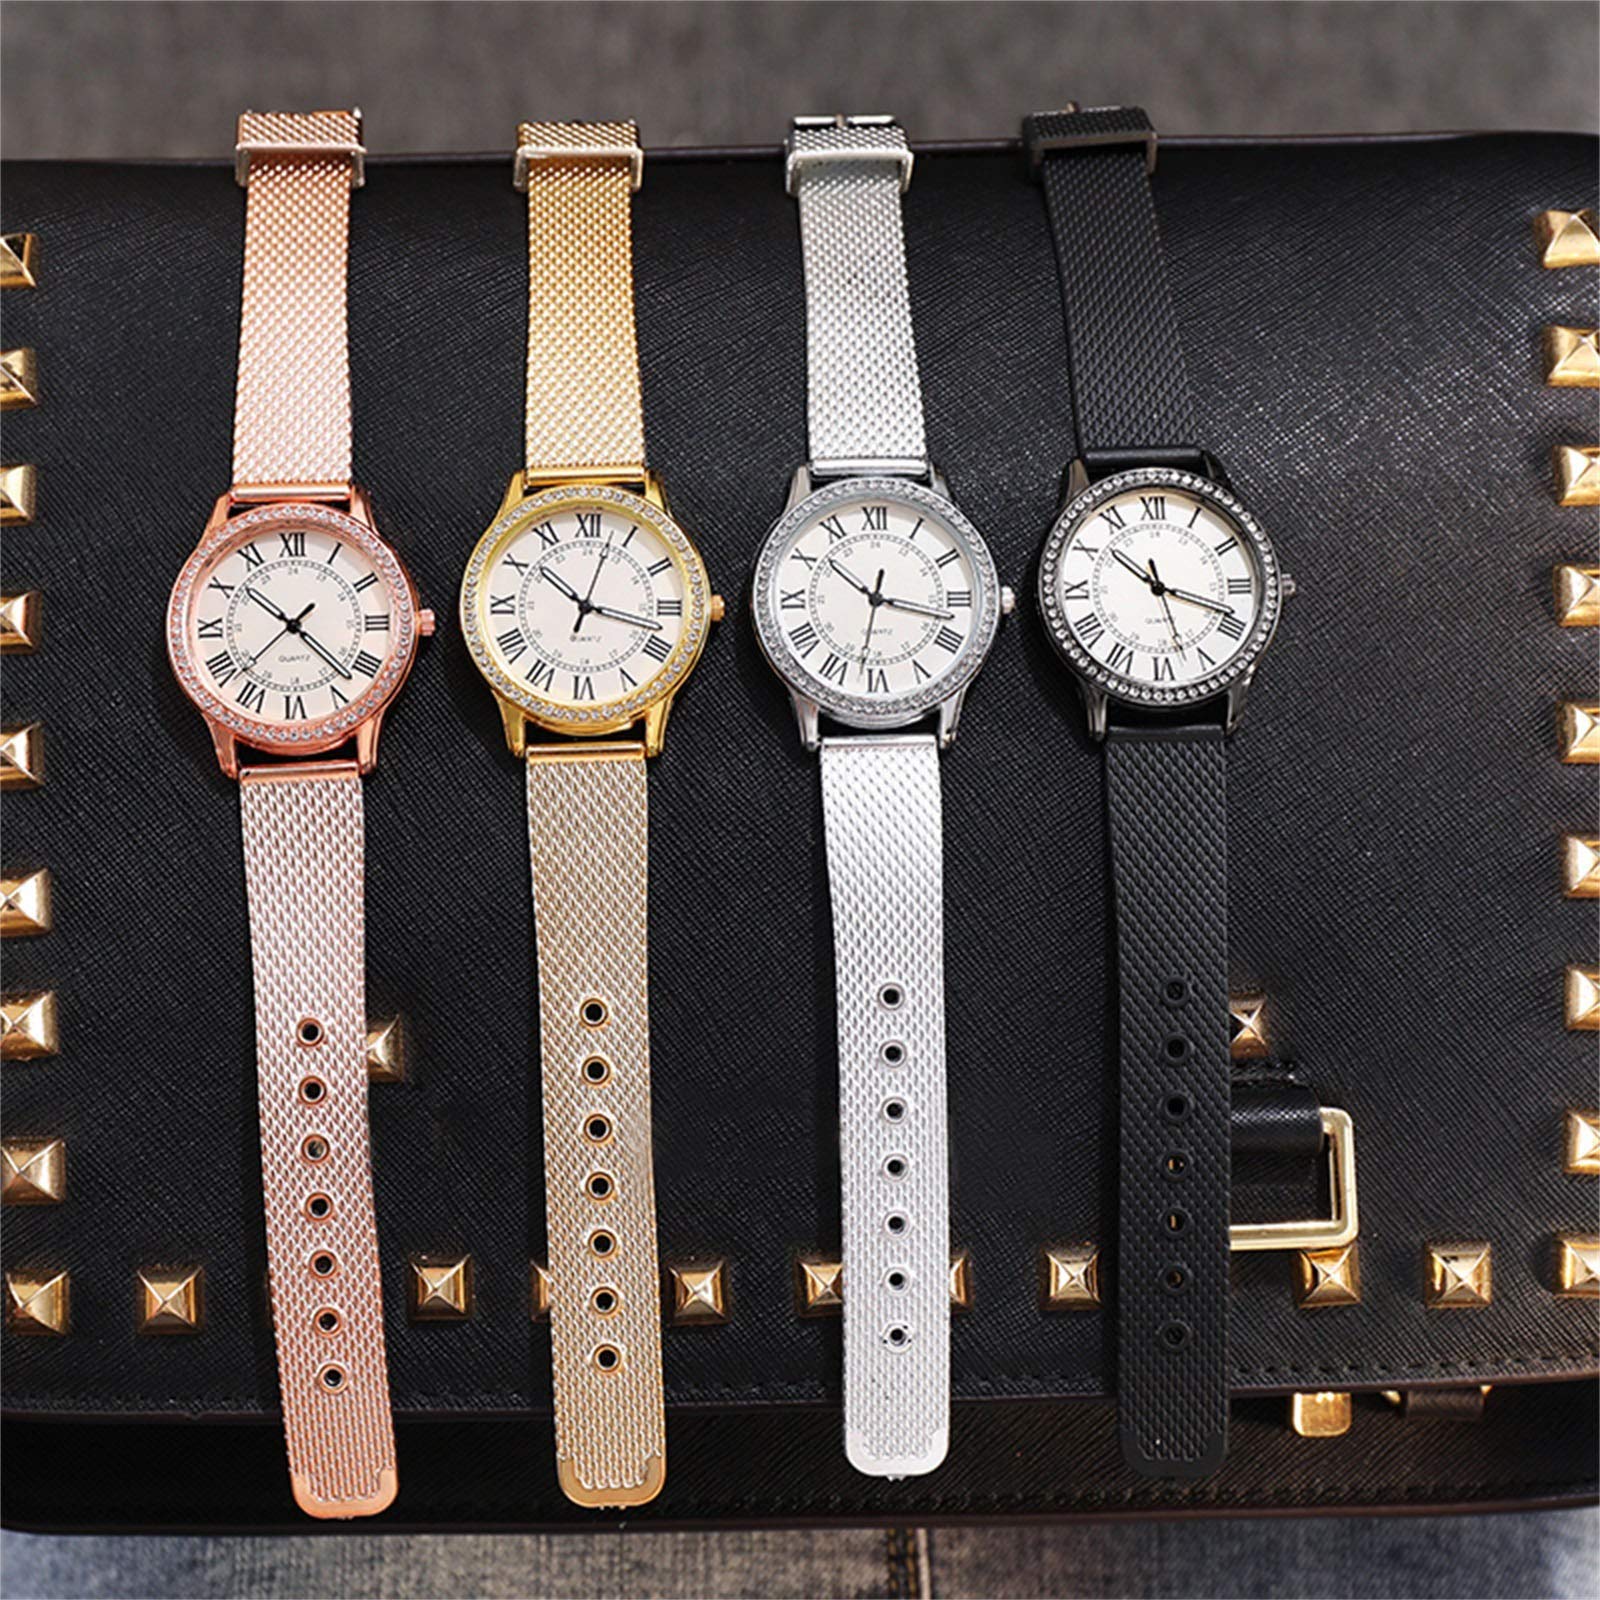 Gierzijia Diamond-Studded Luminous Retro Wristwatch for Women, Fashion Female Watch Stainless Steel Belt Quartz Watch, Gift for Valentine's Day Christmas and Mother's Day